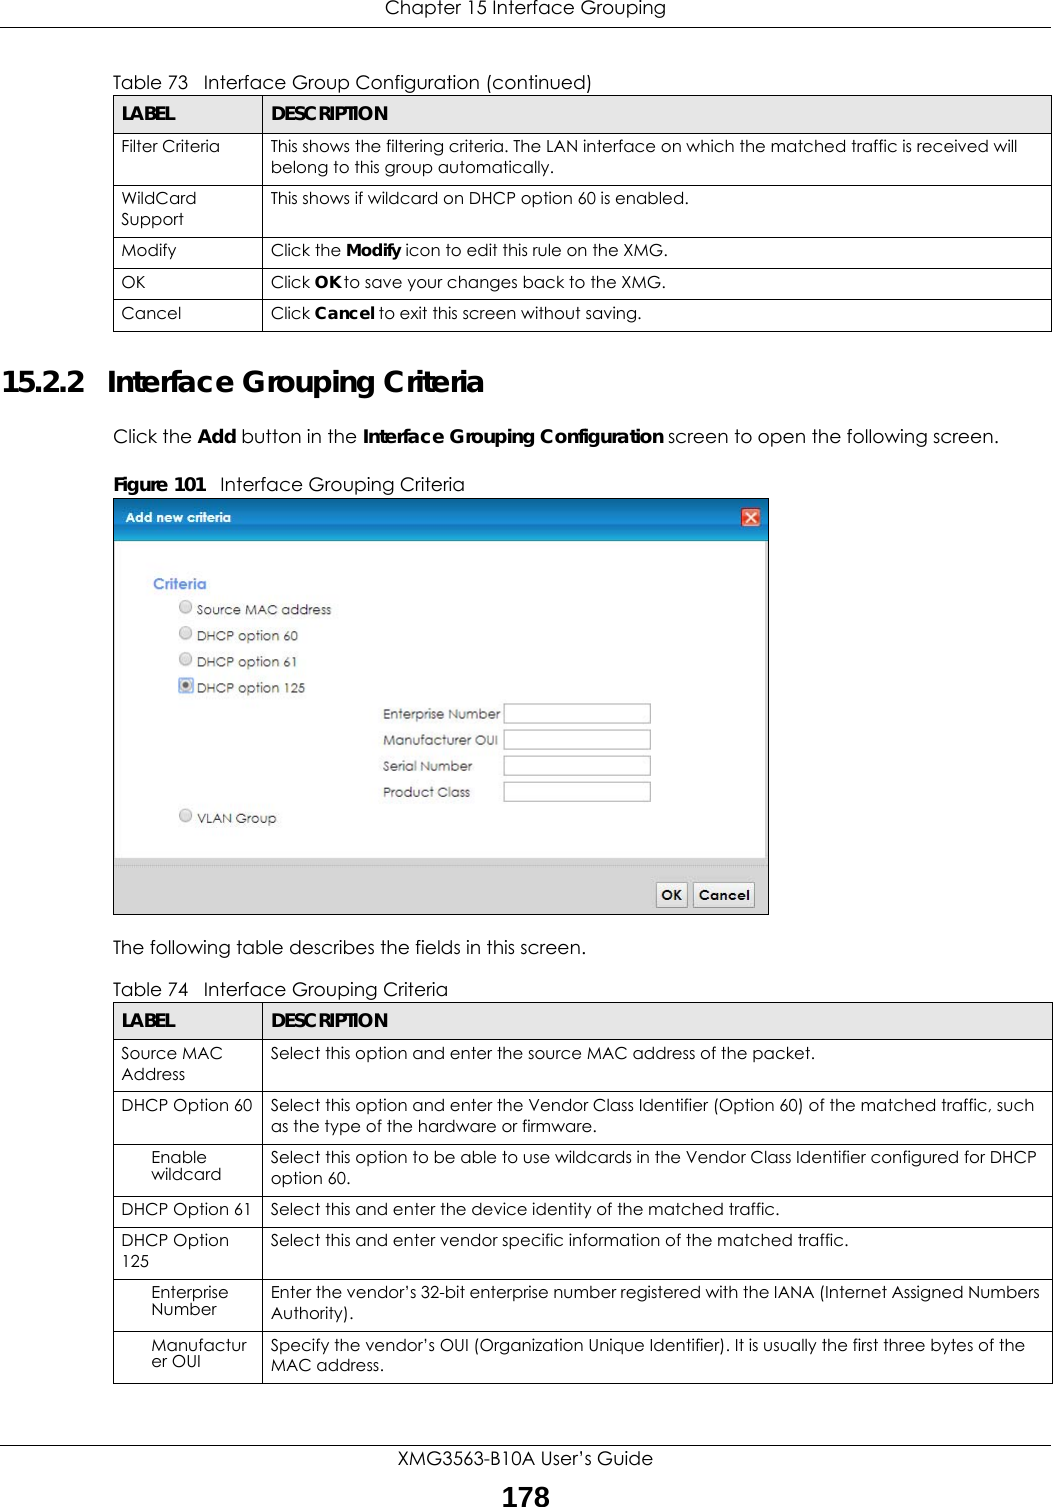 Chapter 15 Interface GroupingXMG3563-B10A User’s Guide17815.2.2   Interface Grouping CriteriaClick the Add button in the Interface Grouping Configuration screen to open the following screen.Figure 101   Interface Grouping Criteria The following table describes the fields in this screen. Filter Criteria This shows the filtering criteria. The LAN interface on which the matched traffic is received will belong to this group automatically.WildCard SupportThis shows if wildcard on DHCP option 60 is enabled.Modify Click the Modify icon to edit this rule on the XMG.OK Click OK to save your changes back to the XMG.Cancel Click Cancel to exit this screen without saving.Table 73   Interface Group Configuration (continued)LABEL DESCRIPTIONTable 74   Interface Grouping CriteriaLABEL DESCRIPTIONSource MAC AddressSelect this option and enter the source MAC address of the packet.DHCP Option 60 Select this option and enter the Vendor Class Identifier (Option 60) of the matched traffic, such as the type of the hardware or firmware.Enable wildcard Select this option to be able to use wildcards in the Vendor Class Identifier configured for DHCP option 60.DHCP Option 61 Select this and enter the device identity of the matched traffic.DHCP Option 125Select this and enter vendor specific information of the matched traffic.Enterprise Number Enter the vendor’s 32-bit enterprise number registered with the IANA (Internet Assigned Numbers Authority).Manufacturer OUI Specify the vendor’s OUI (Organization Unique Identifier). It is usually the first three bytes of the MAC address.